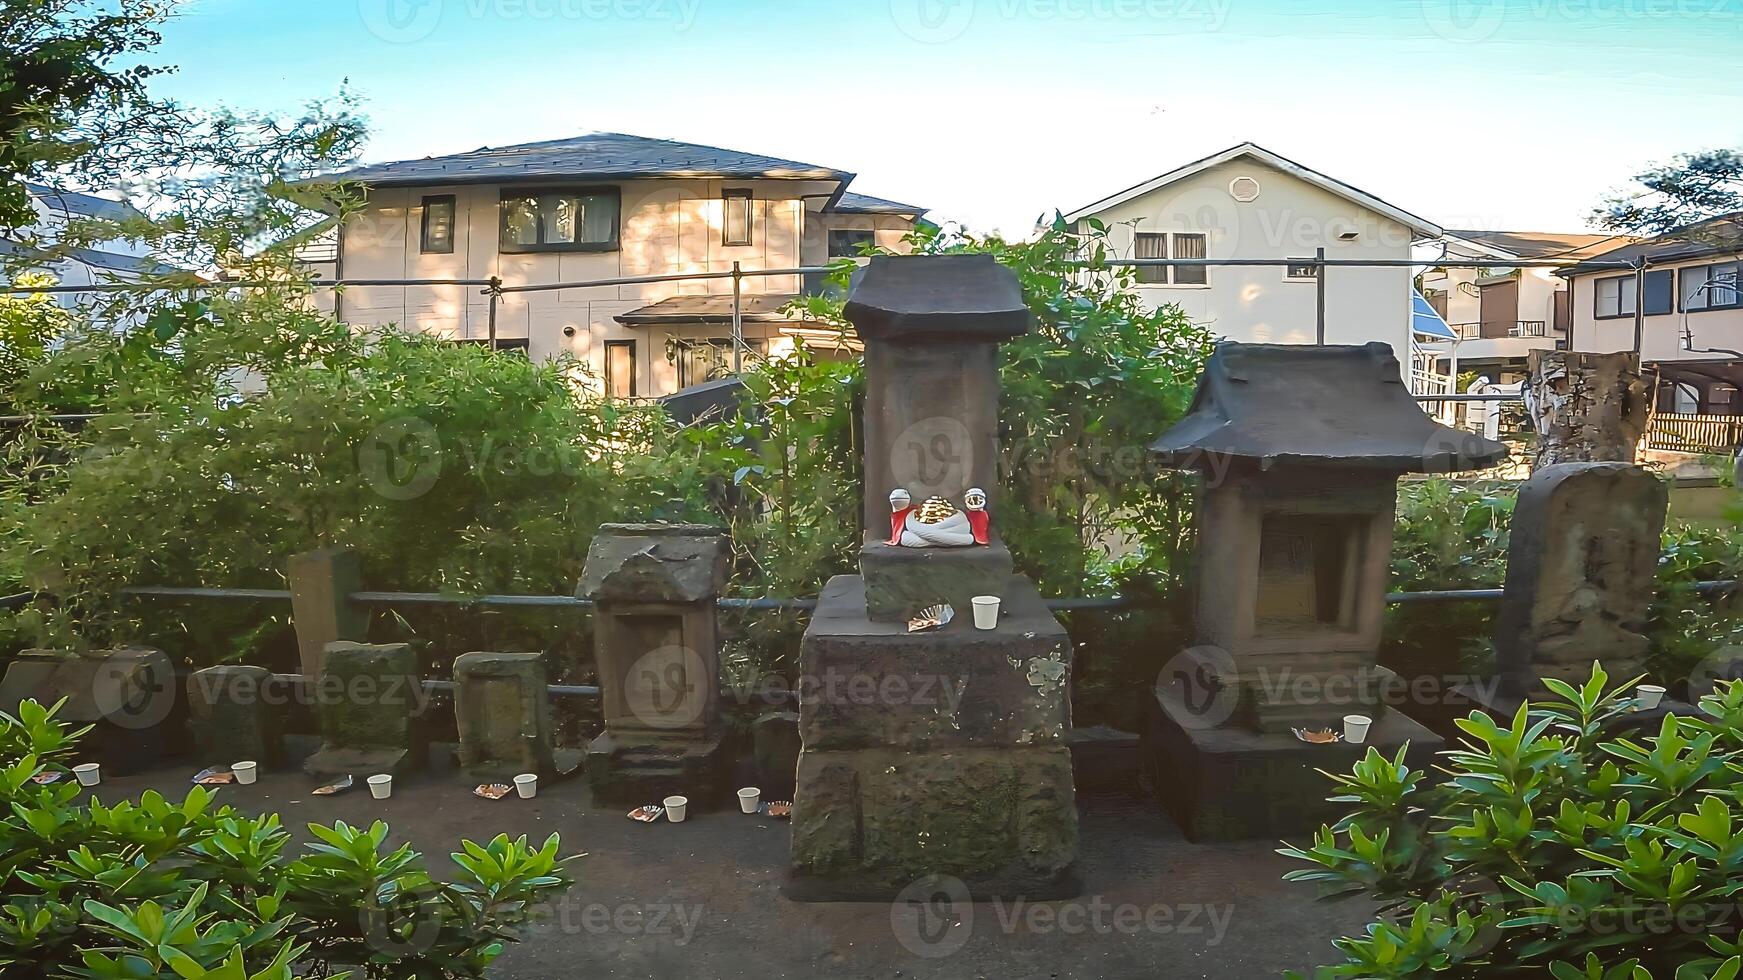 A small stone shrine on the grounds of Shibamata Hachiman Shrine,in Shibamata, Katsushika Ward, Tokyo, Japan Our shrine building is built on top of an ancient tomb photo